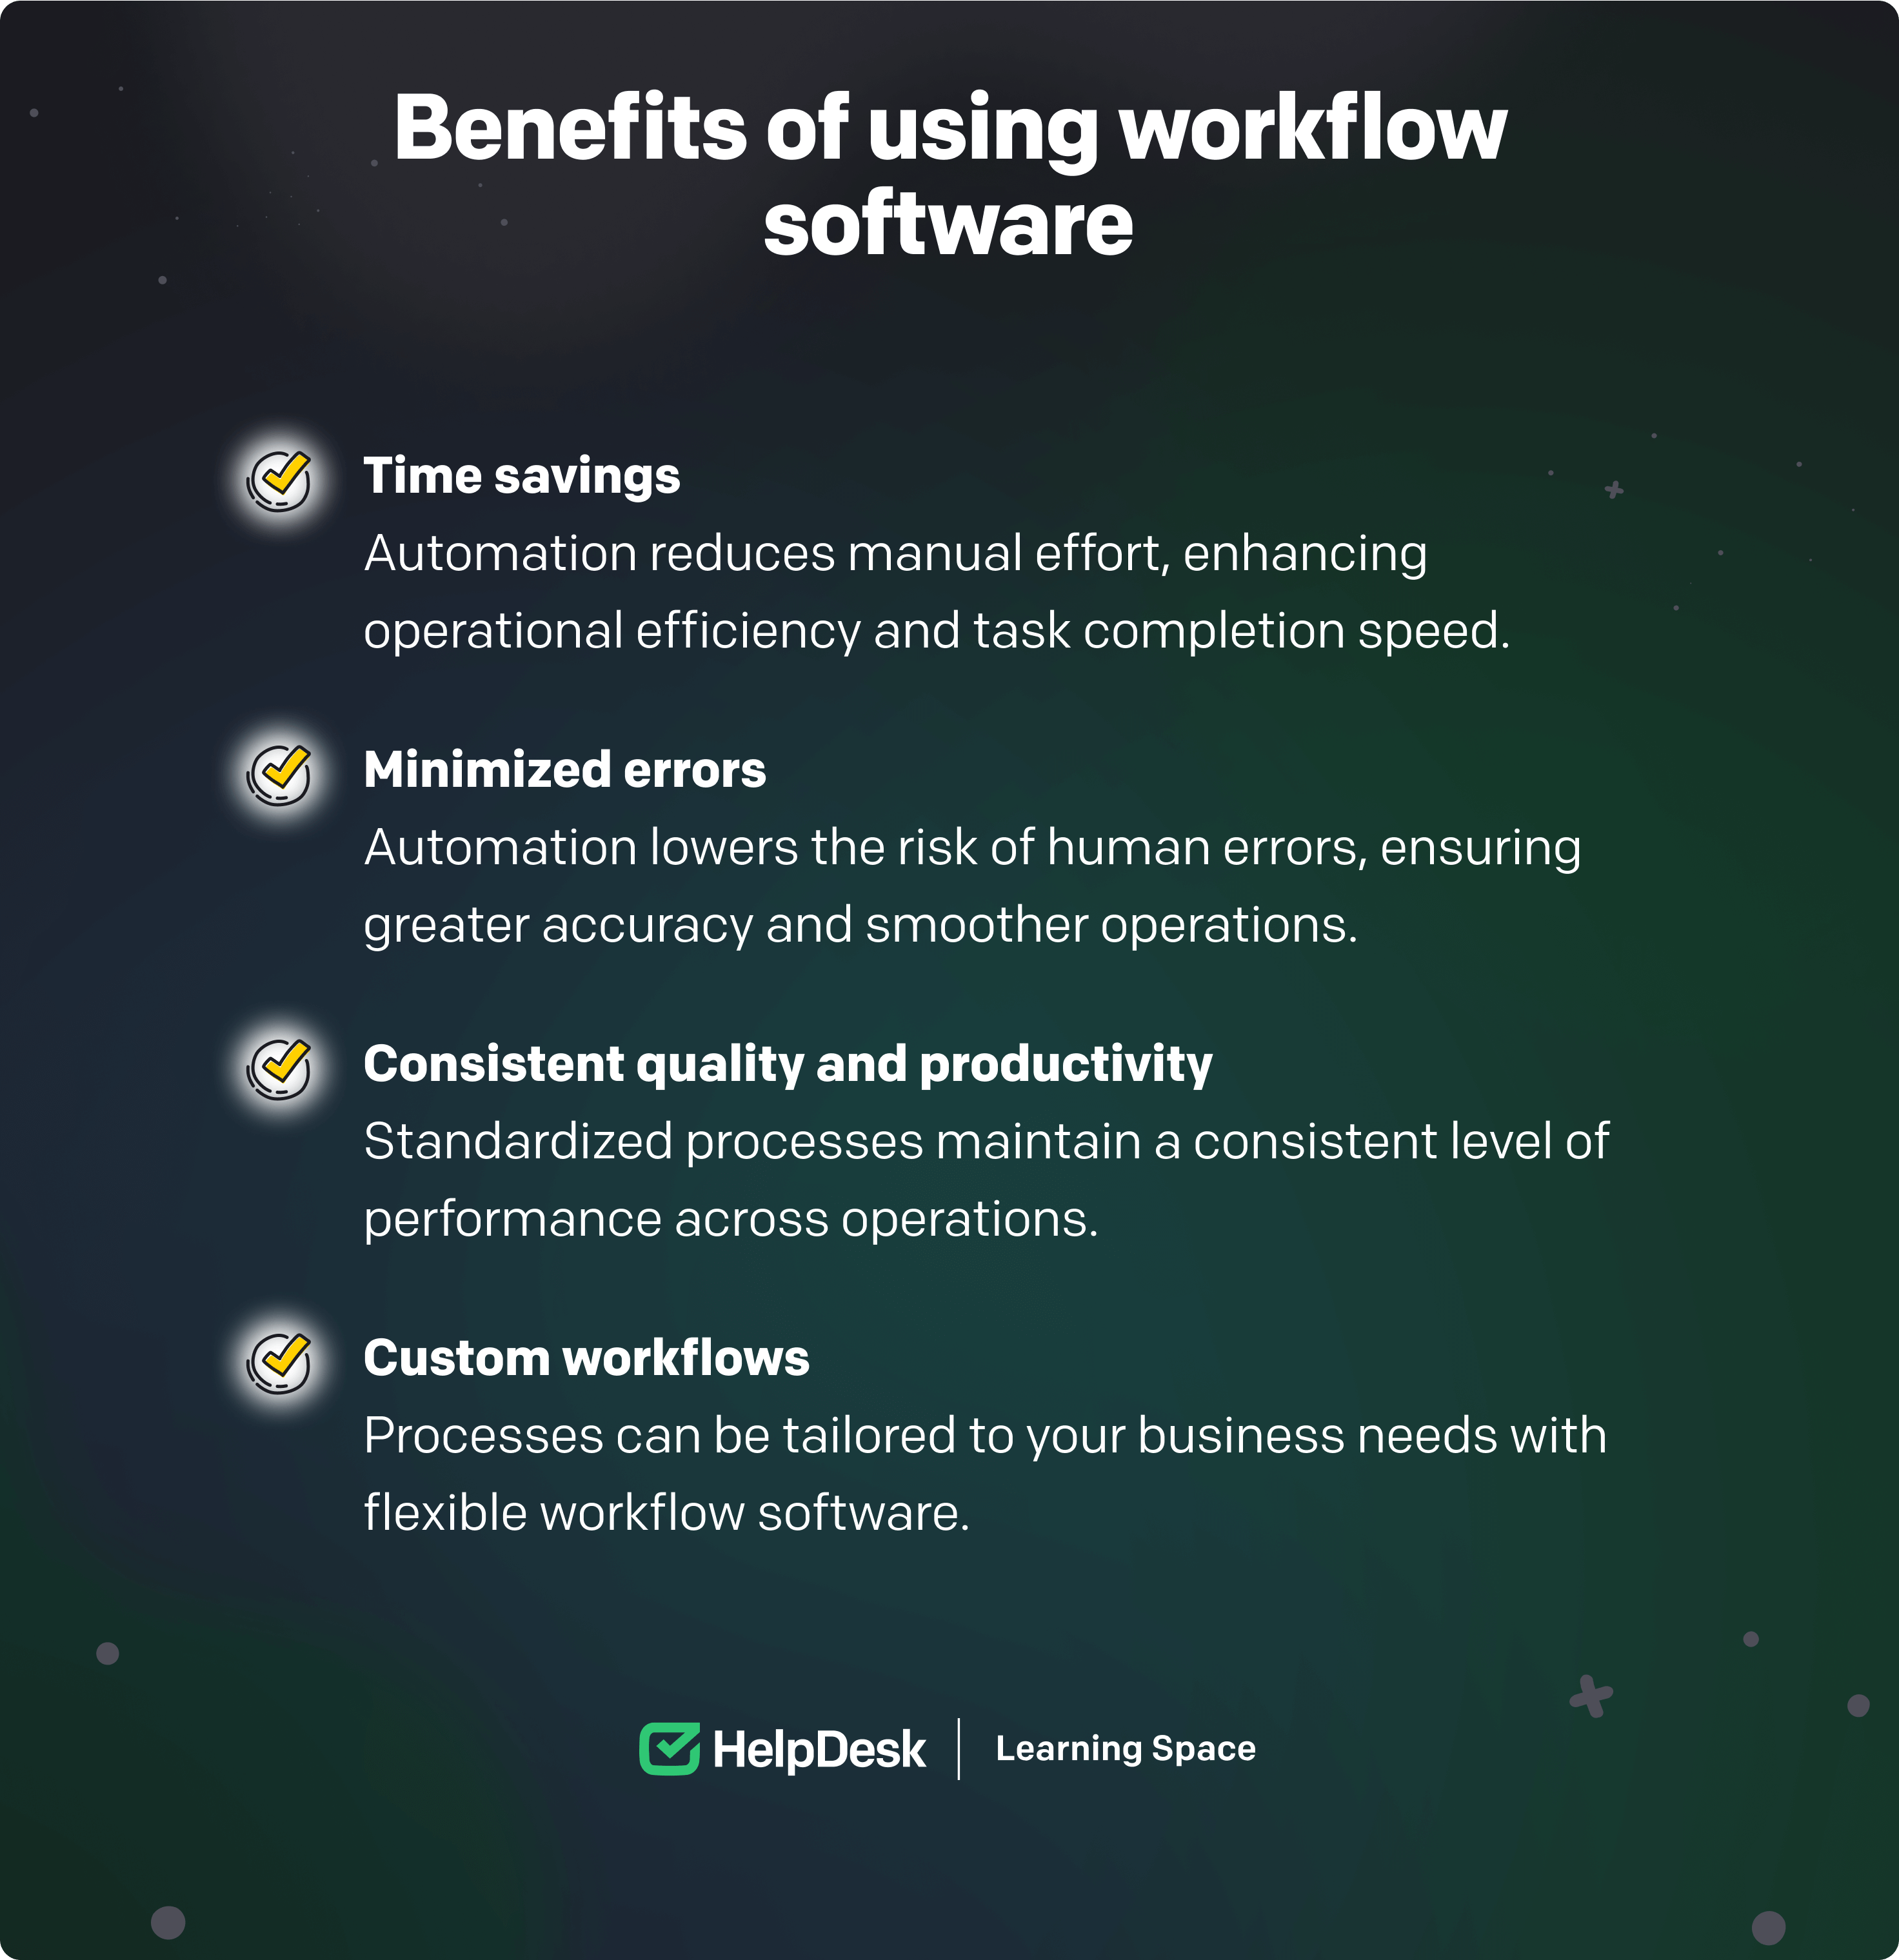 Benefits of using workflow application: time savings, minimized errors, consistent quality and productivity, custom workflows, improved collaboration, enhanced visibility, compliance and audit trail, and scalability